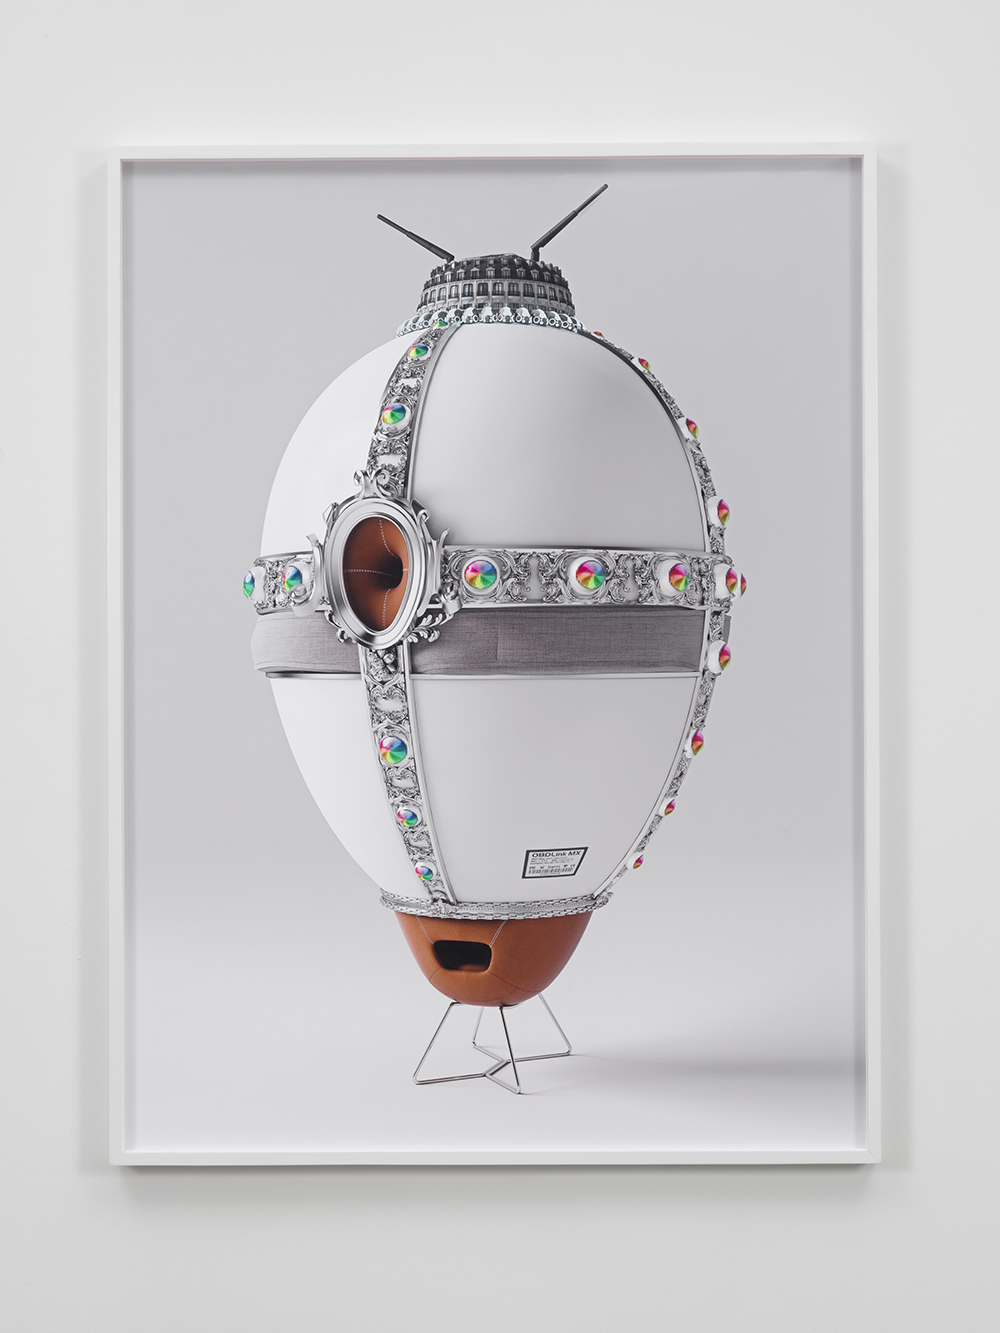 Unique contemporary art project inspired by Faberge eggs